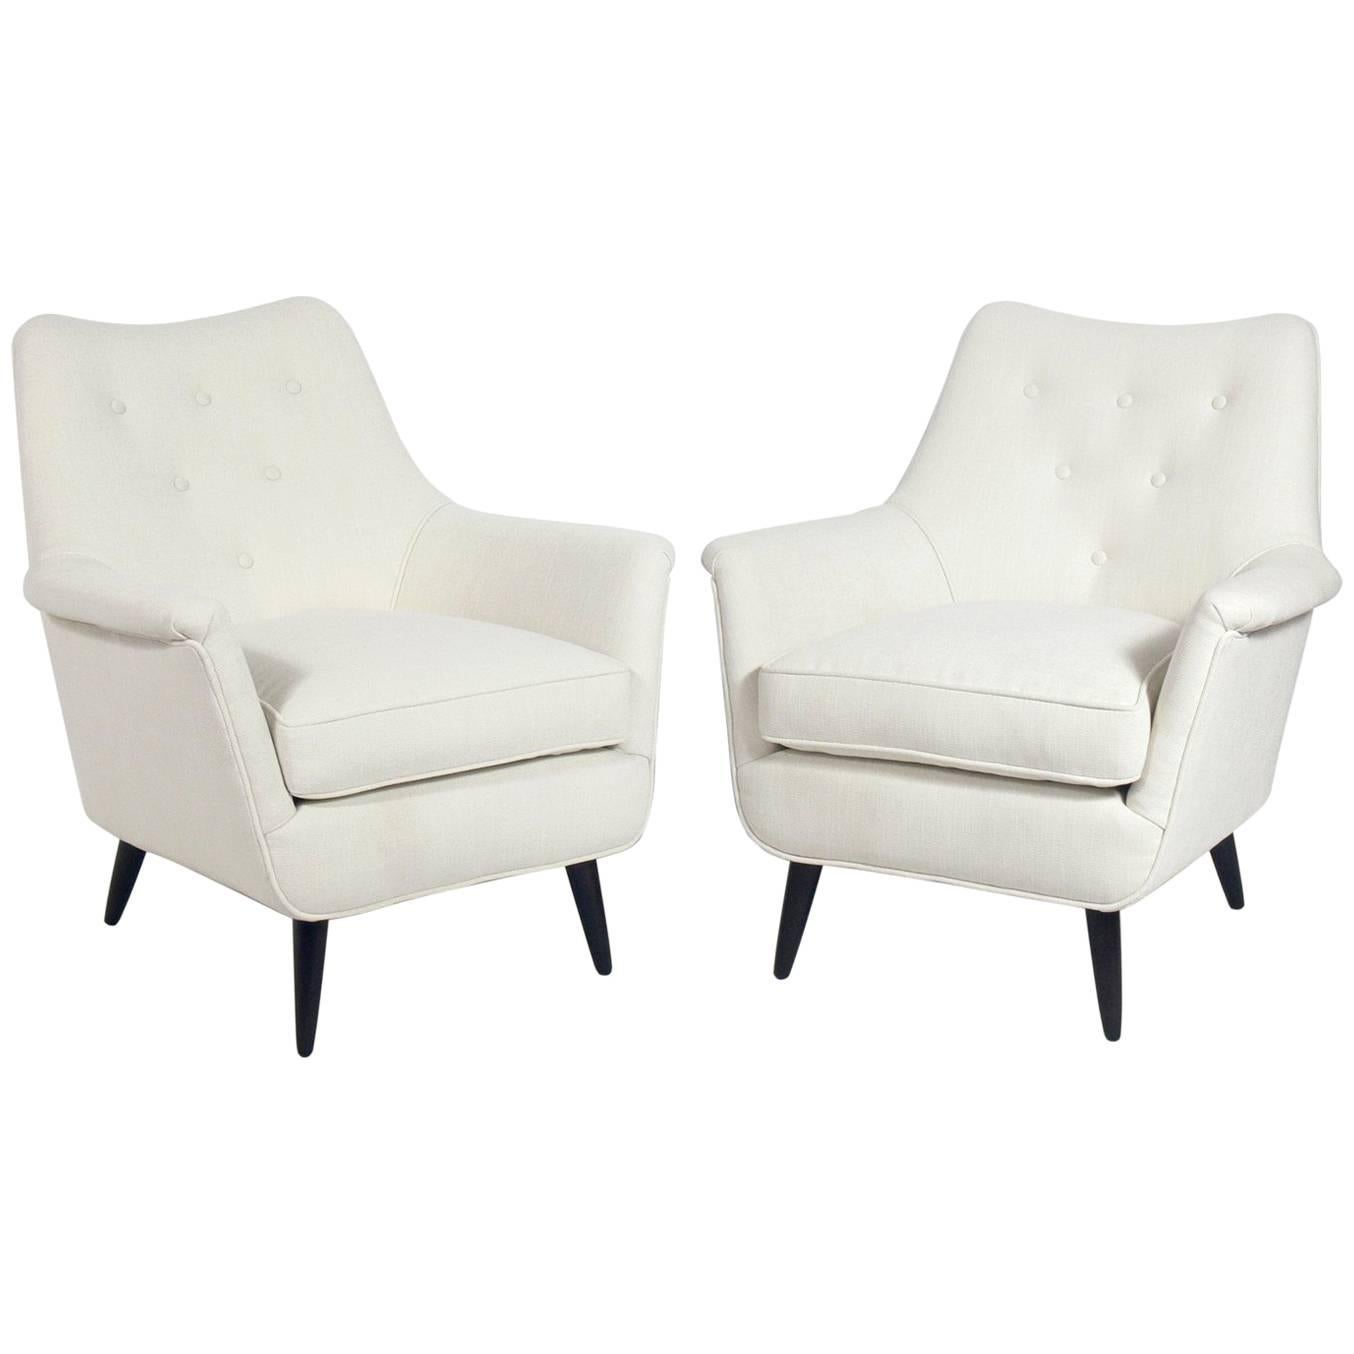 Pair of Curvaceous Italian Lounge Chairs